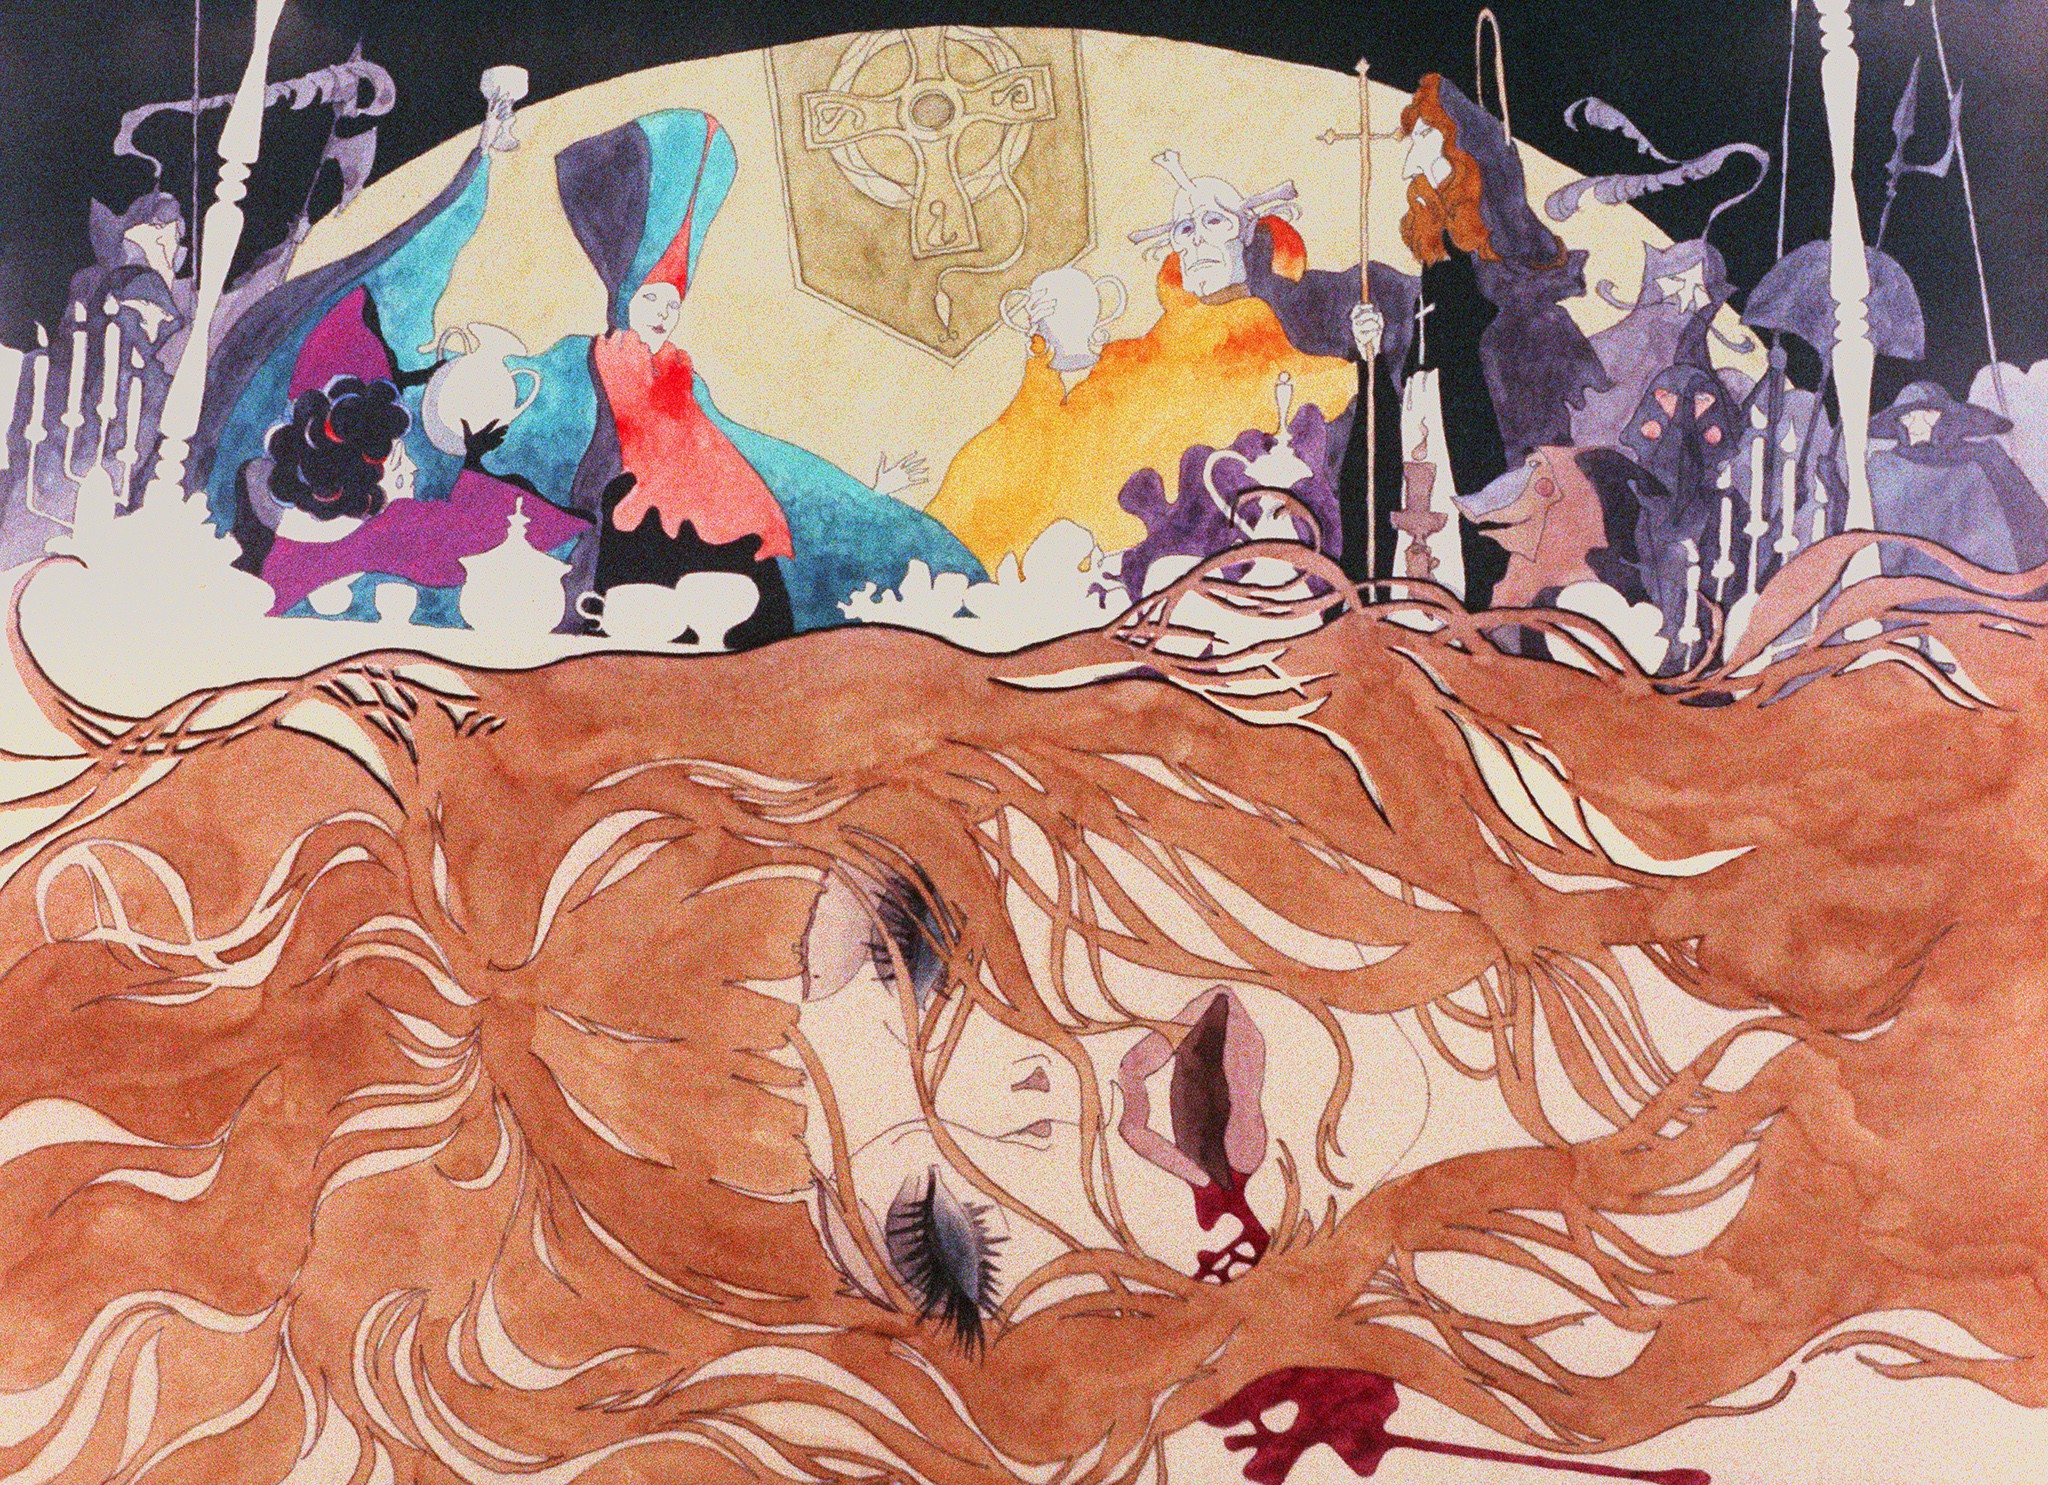 Belladonna of Sadness, made in 1973, is a medieval medley of rape, orgies and deals with the devil, and an odd mix of folk tale and feminist manifesto